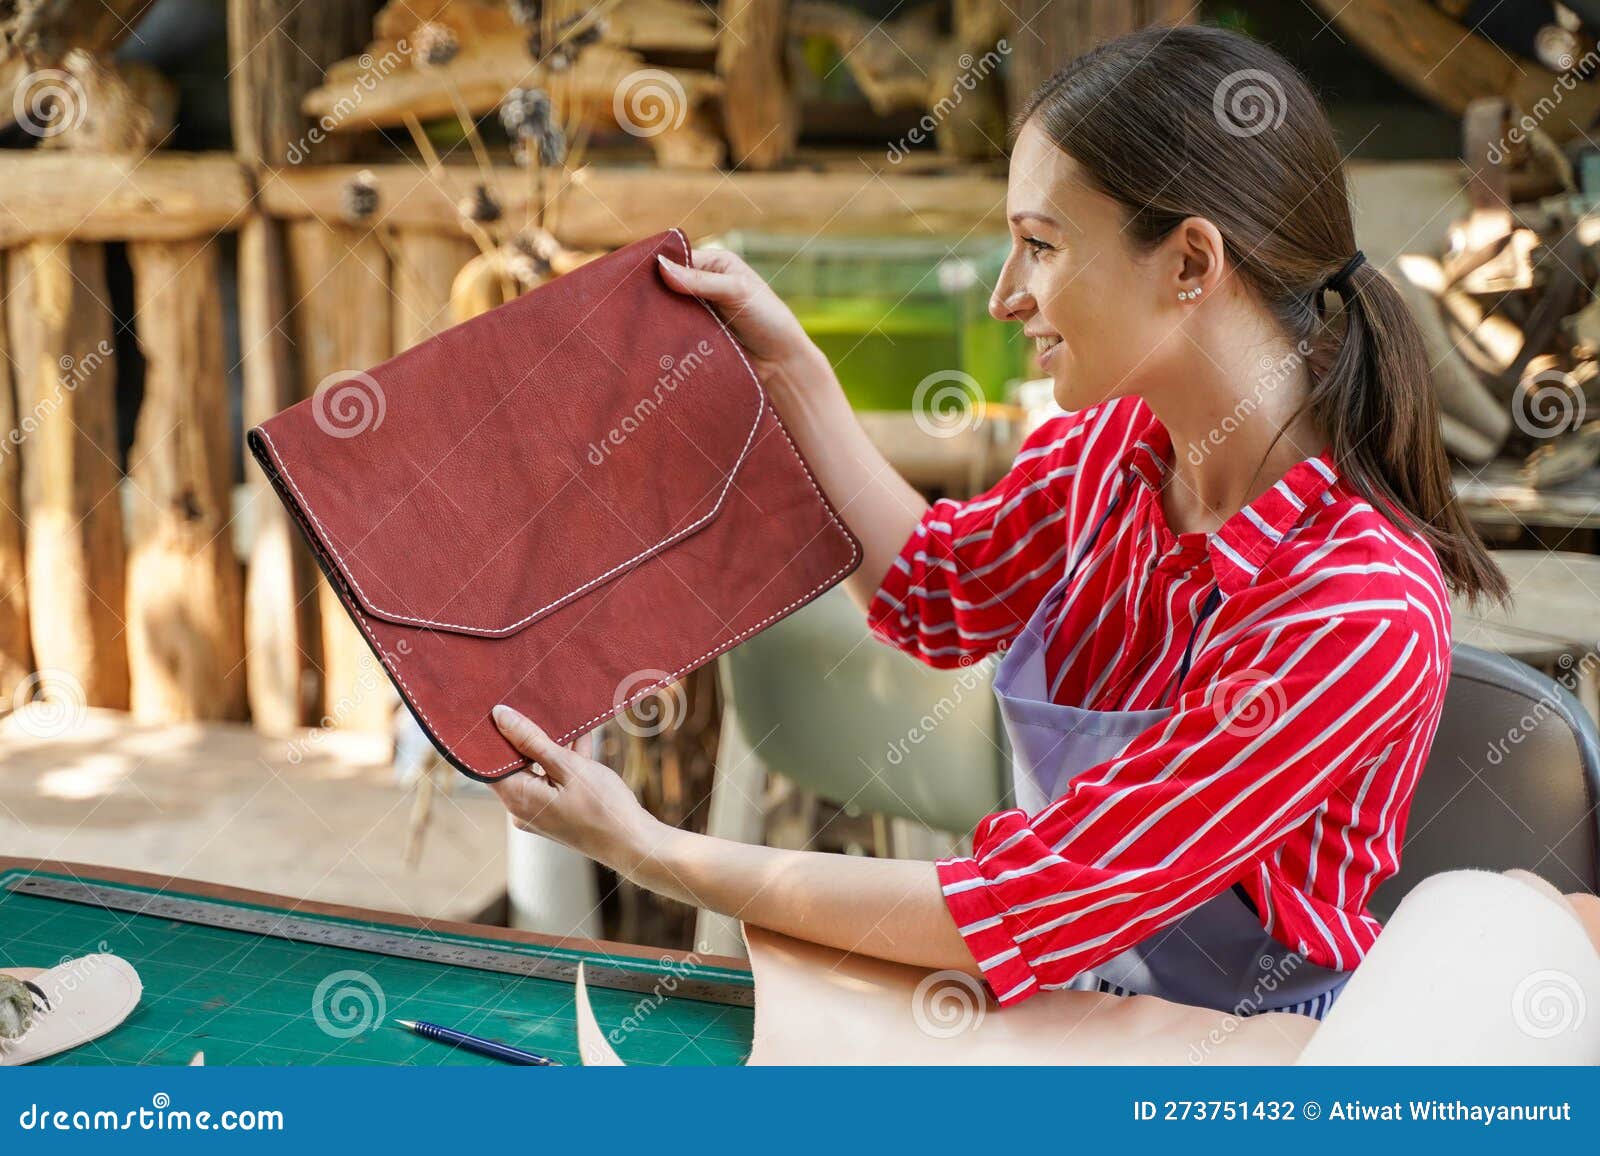 young female leather goods maker looking and check the neatness of the leathers bag before sell to customer in workshop